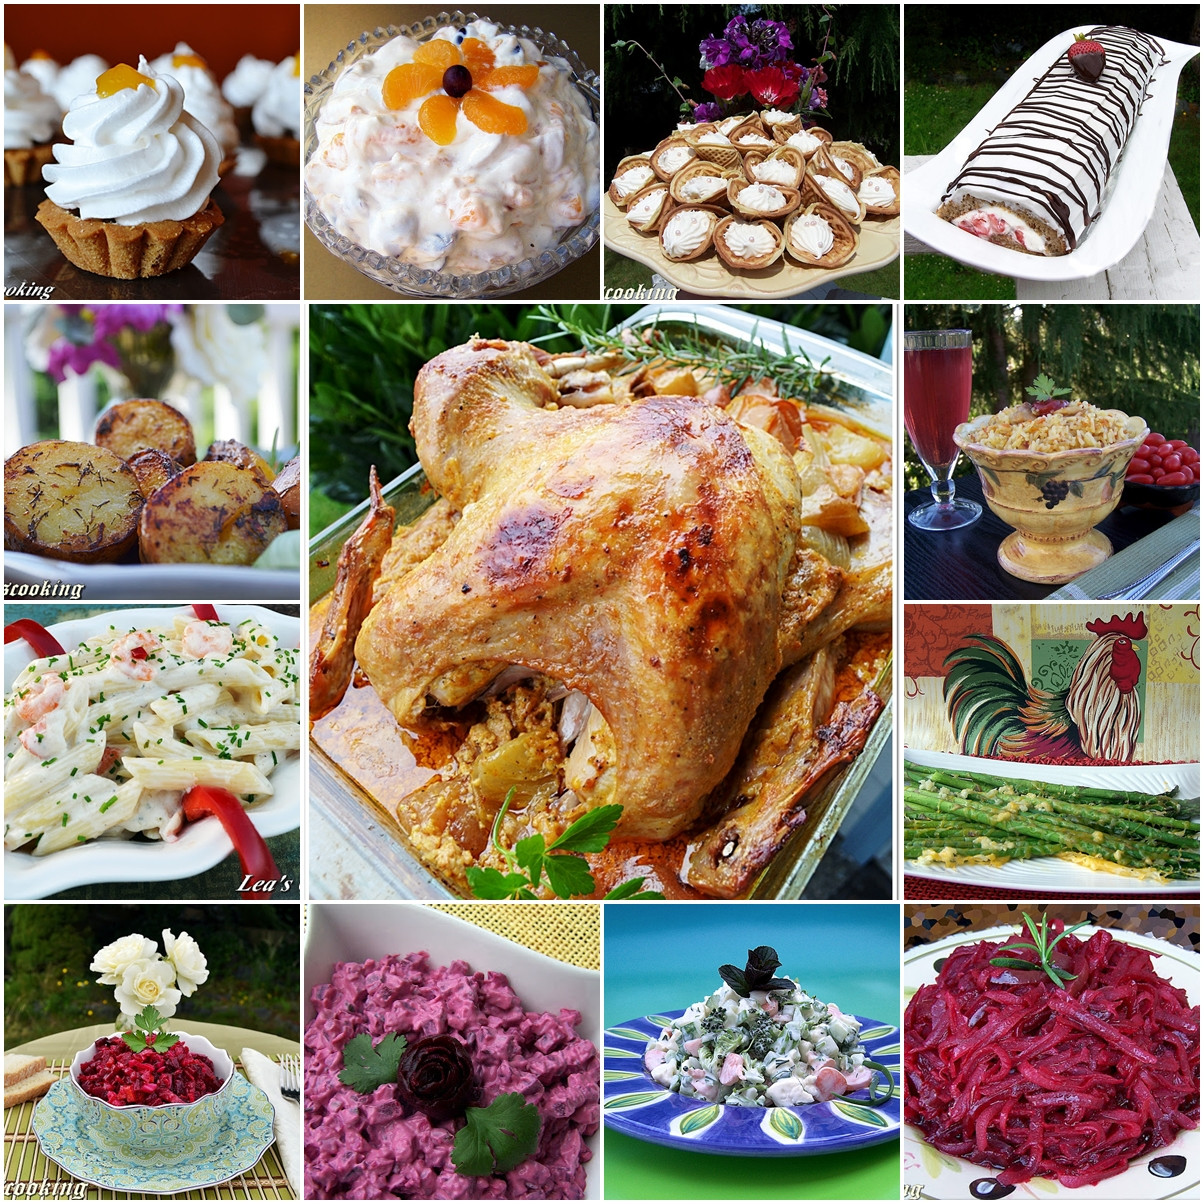 Ideas For A Dinner Party
 Lea s Cooking "Thanksgiving Dinner Party Ideas"